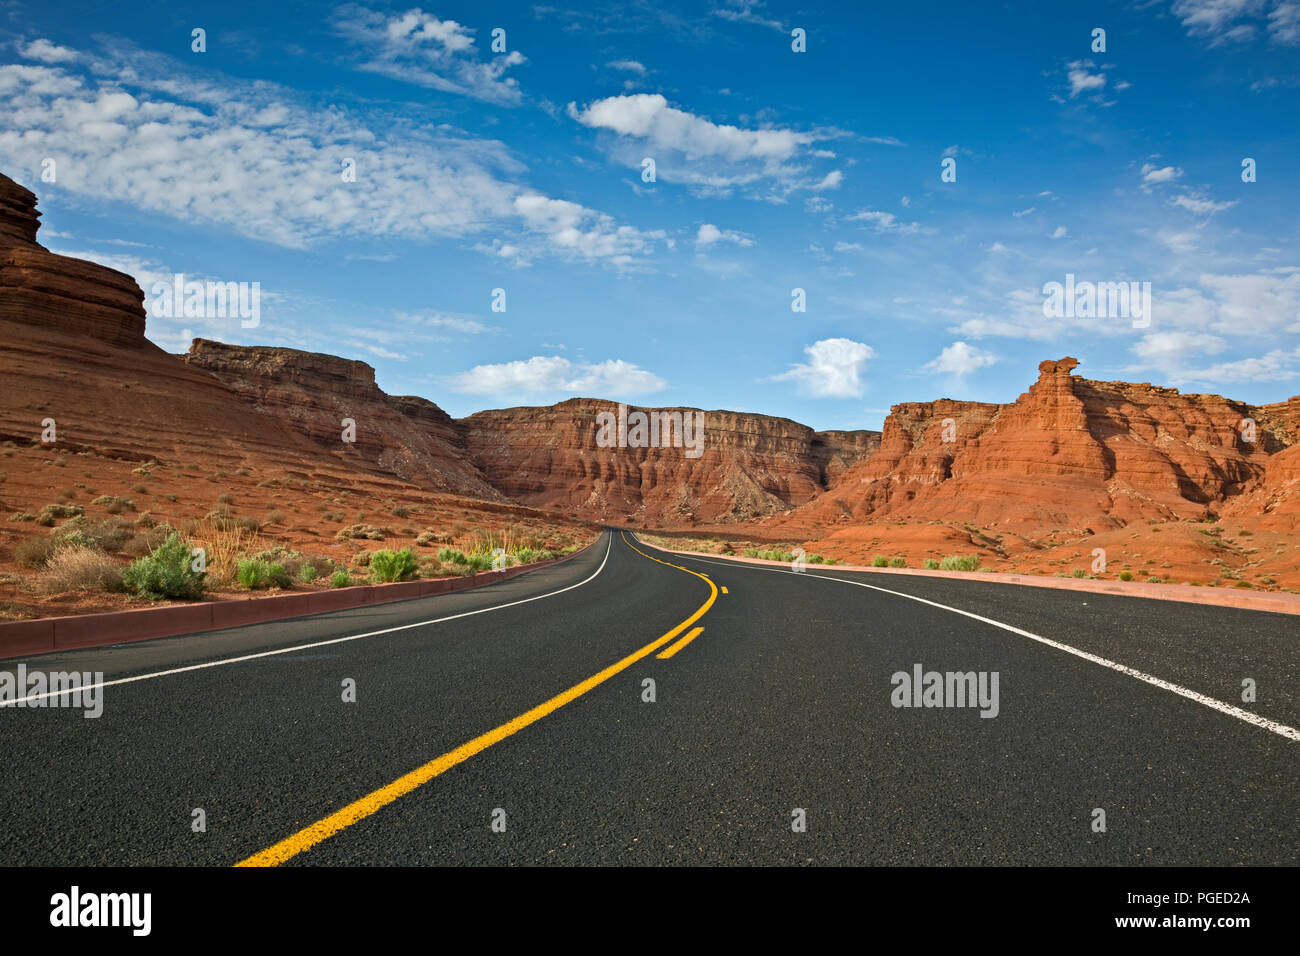 AZ00347-00...ARIZONA - Lee's Ferry Road running along the base of the Vermilion Cliffs in Glen Canyon National Recreation Area. Stock Photo